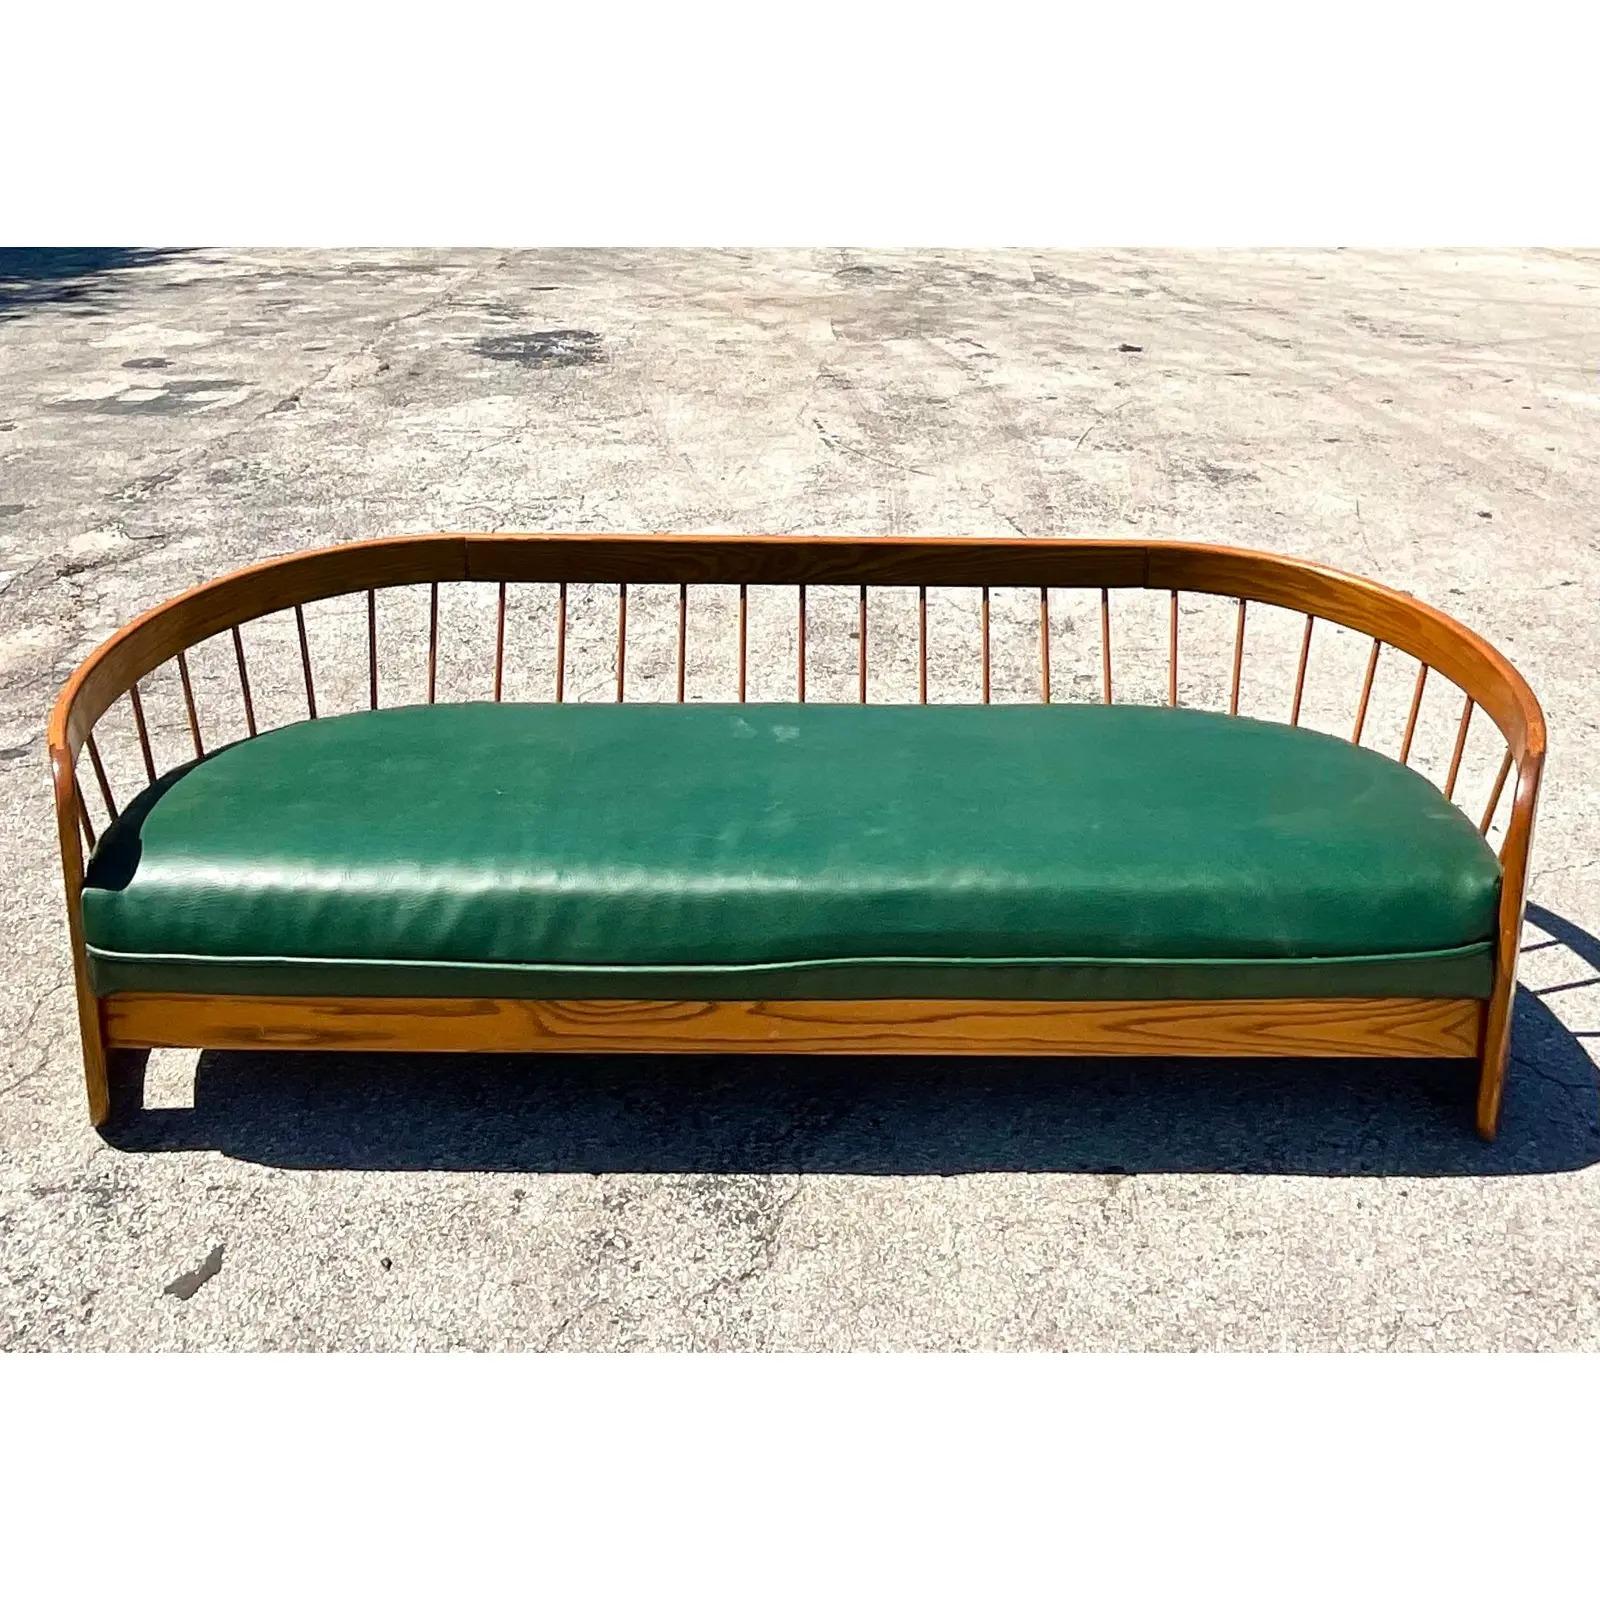 80s wooden couch